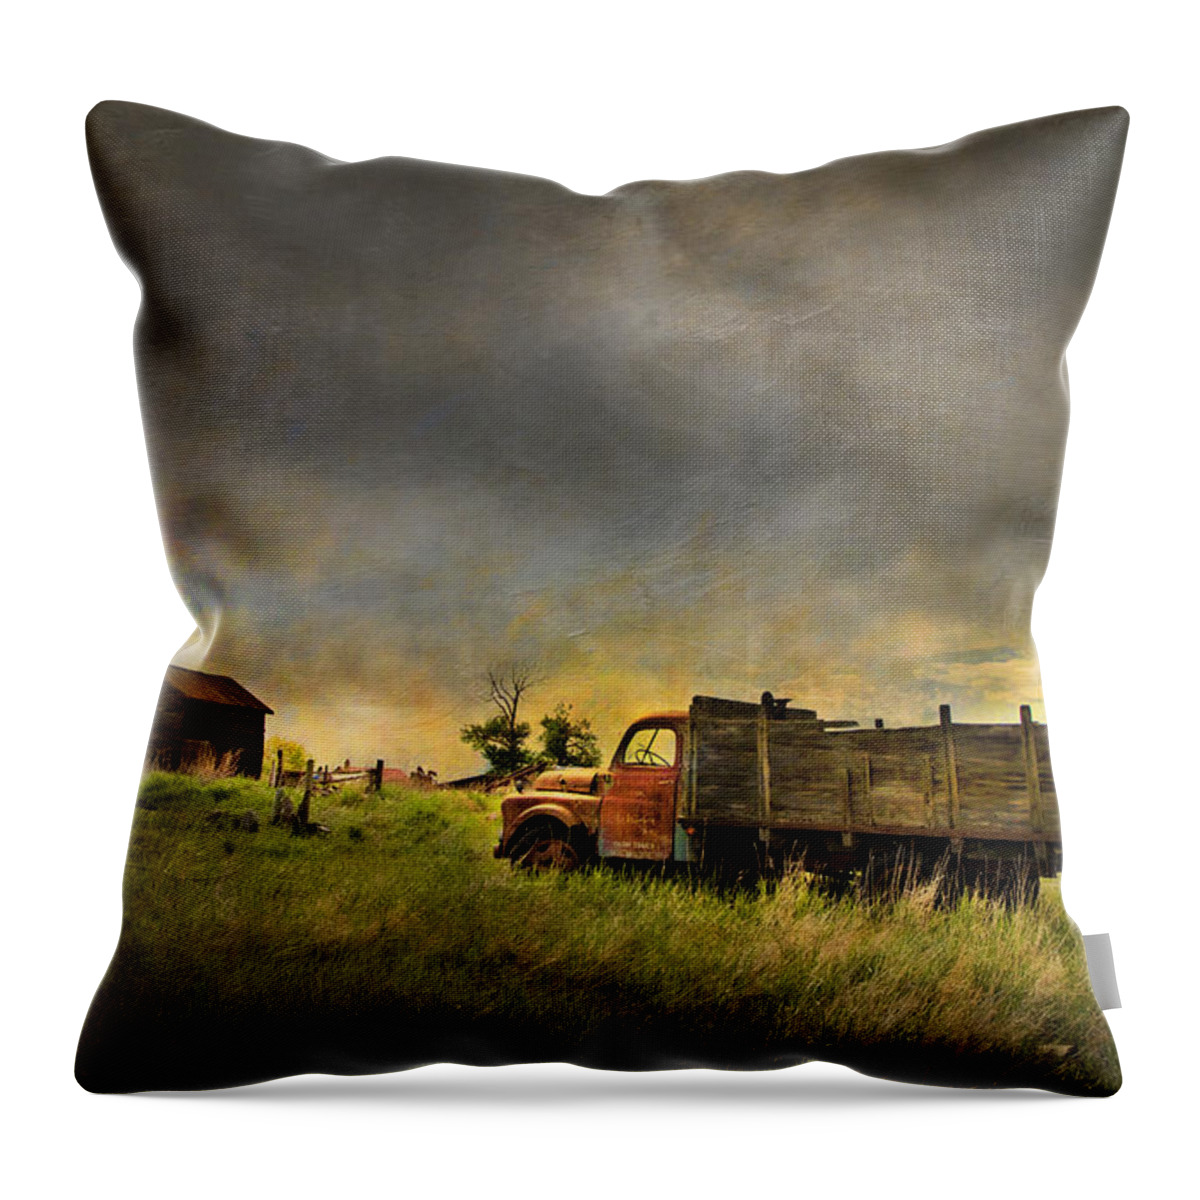 Dodge Throw Pillow featuring the photograph Abandoned Farm Truck by Theresa Tahara